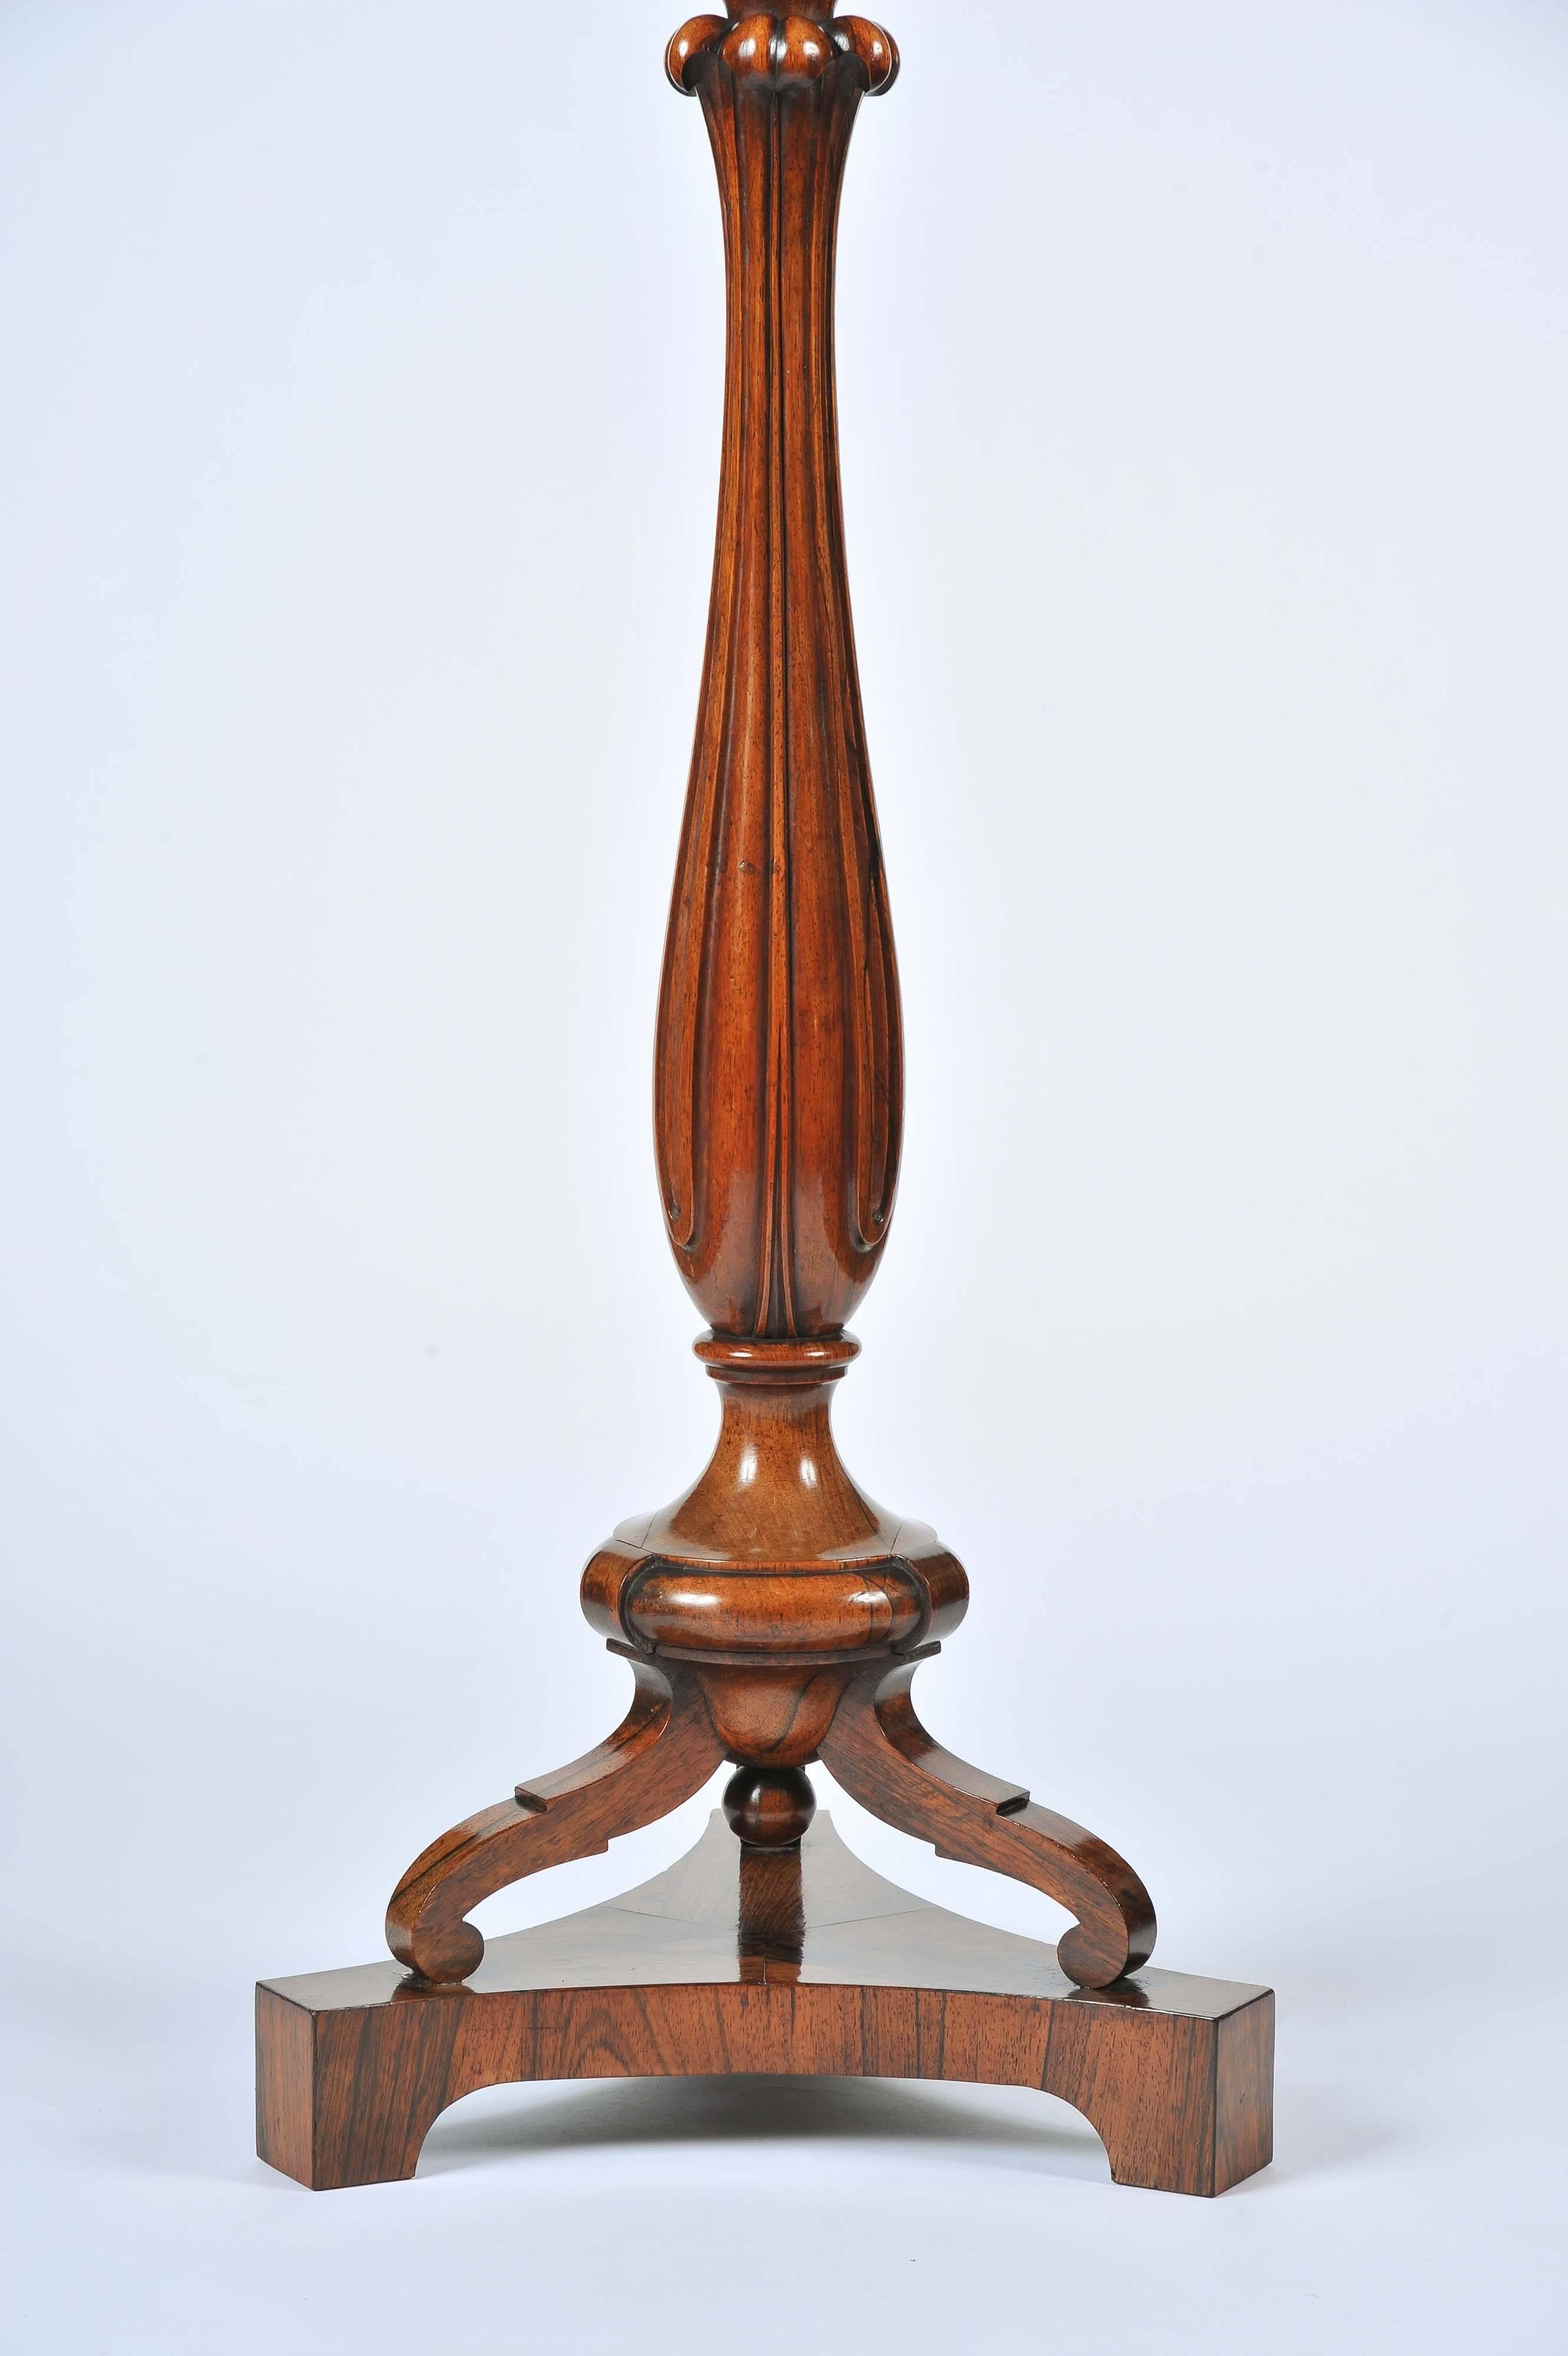 A very elegant William IV period rosewood jardinière of fabulous quality. The Grecian tripod legs on tri-form base supporting an elongated and lobed baluster stem below the ogee lappet edged bowl, with original liner. Measures: The liner: 10.25